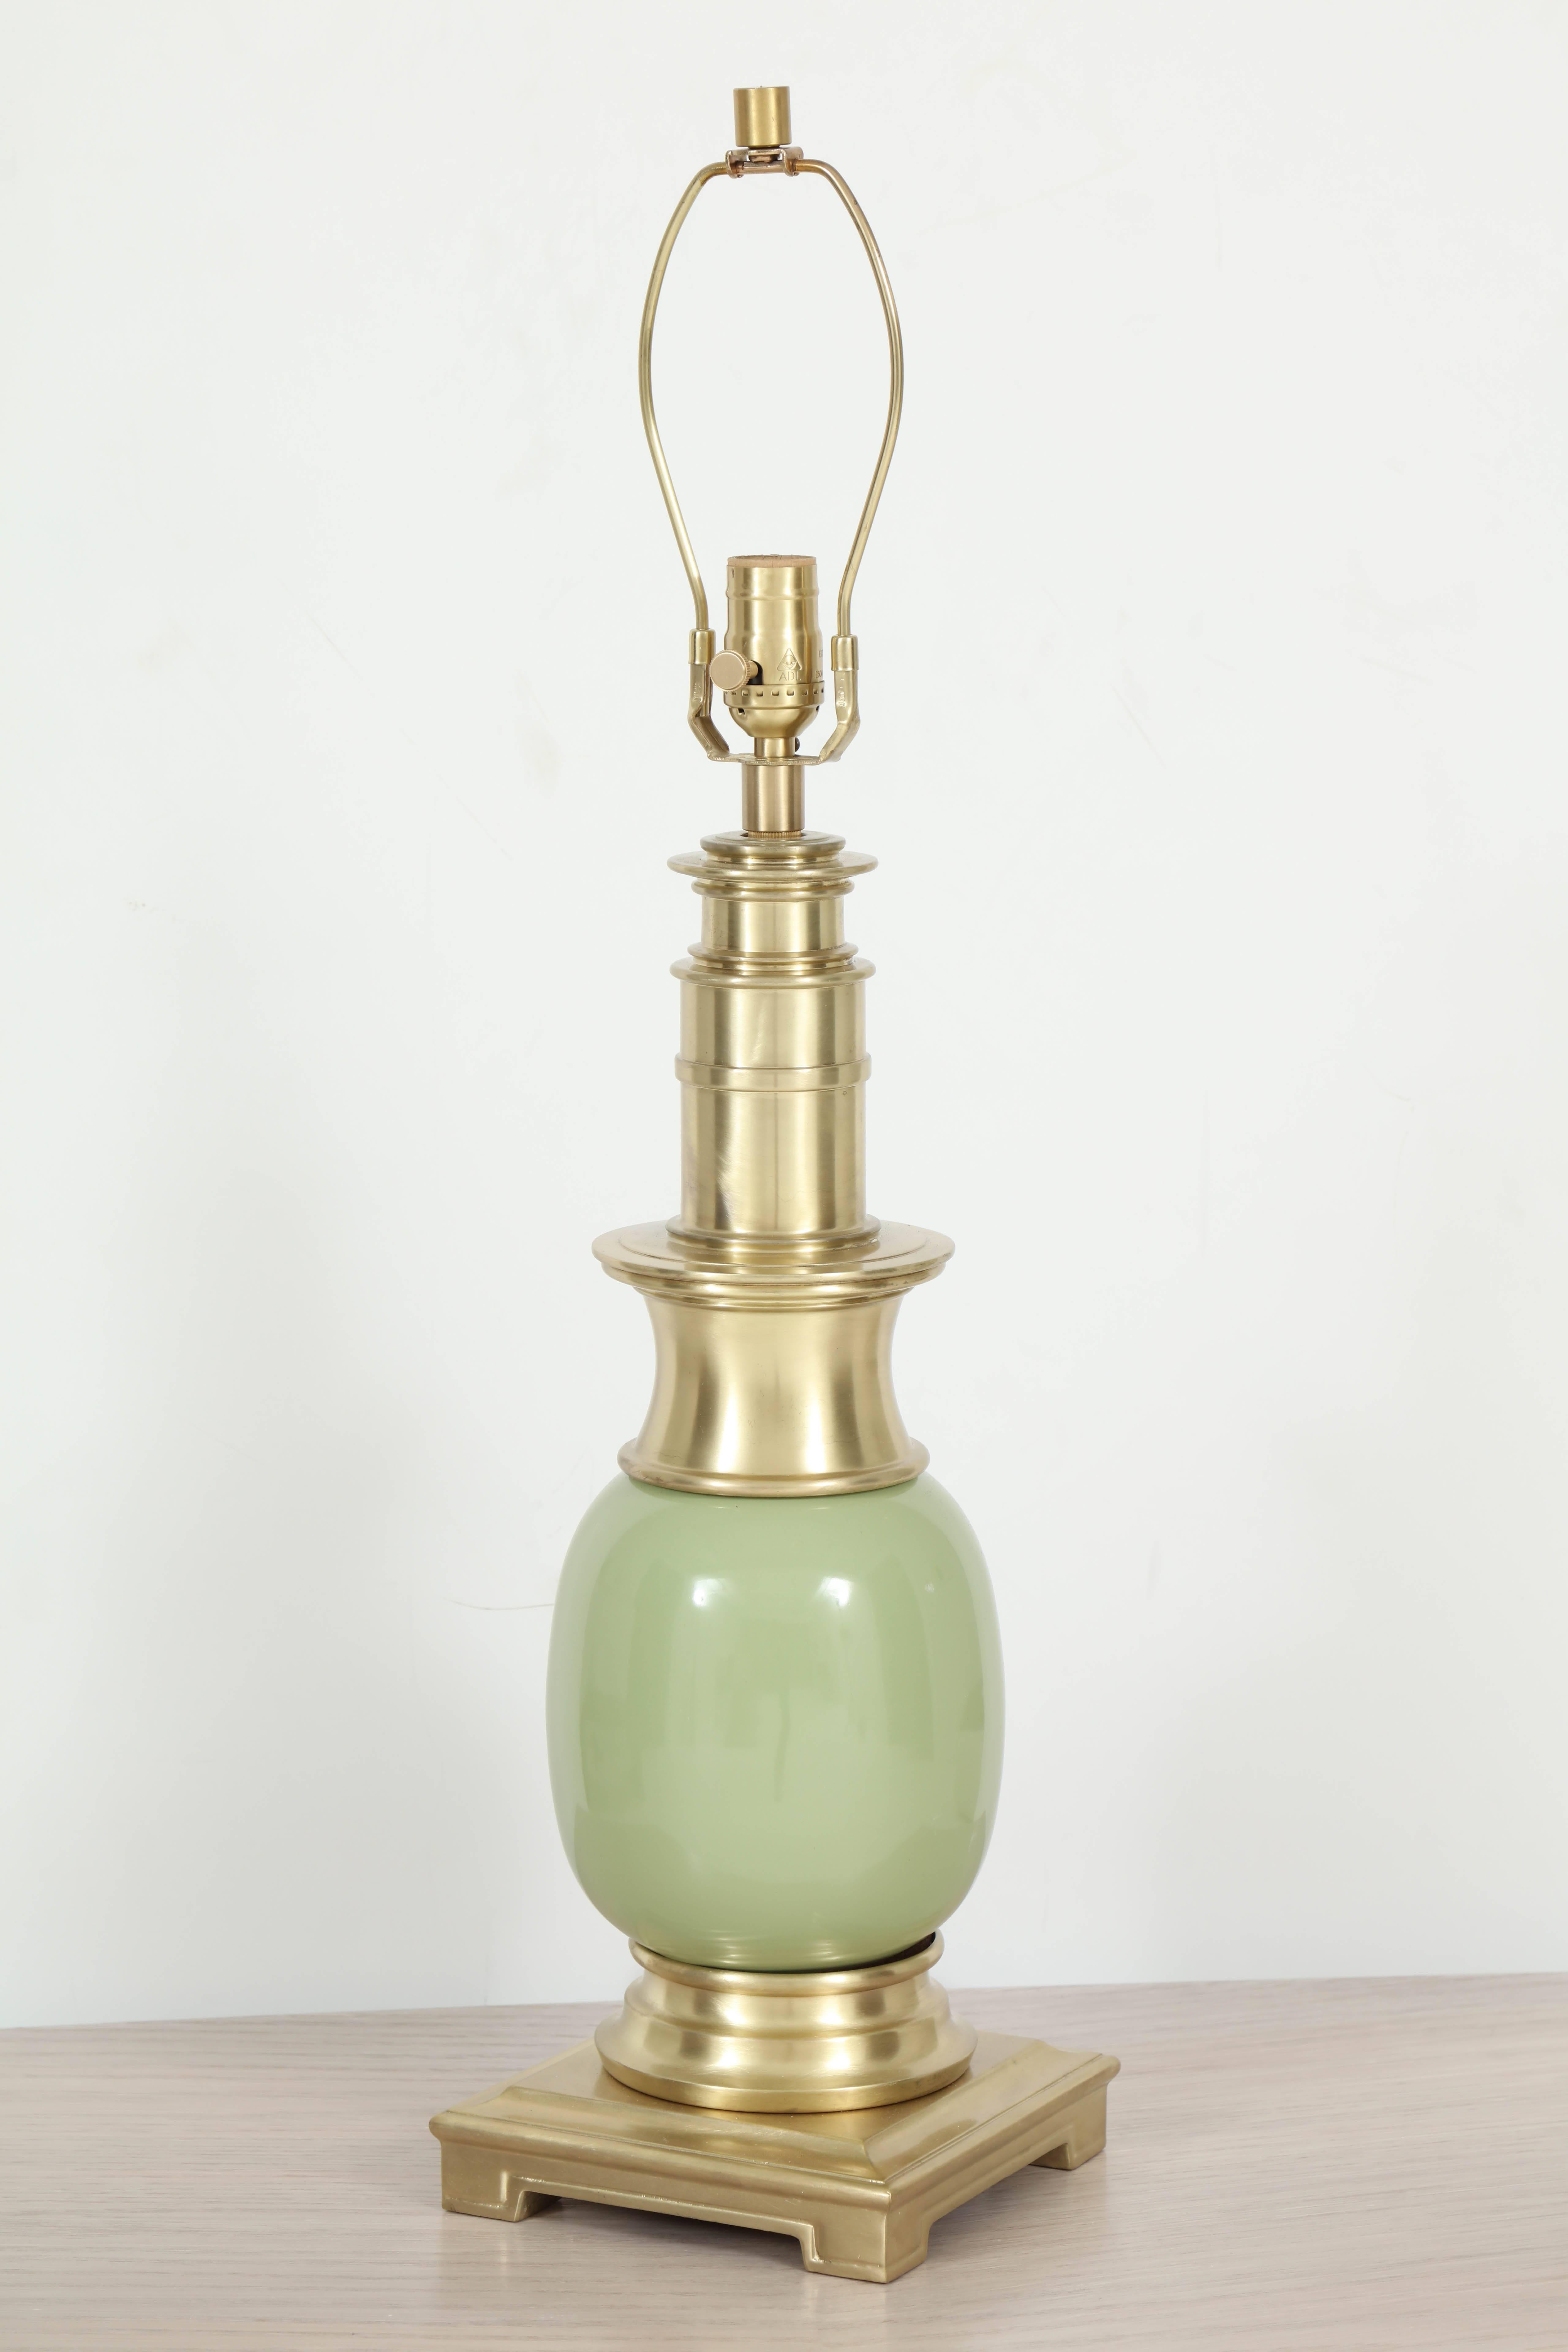 Pair of exquisite Parzinger influenced midcentury lamps with a muted celadon green ceramic orb body with satin brass fittings. Lamps have been rewired with new sockets and silk cords.